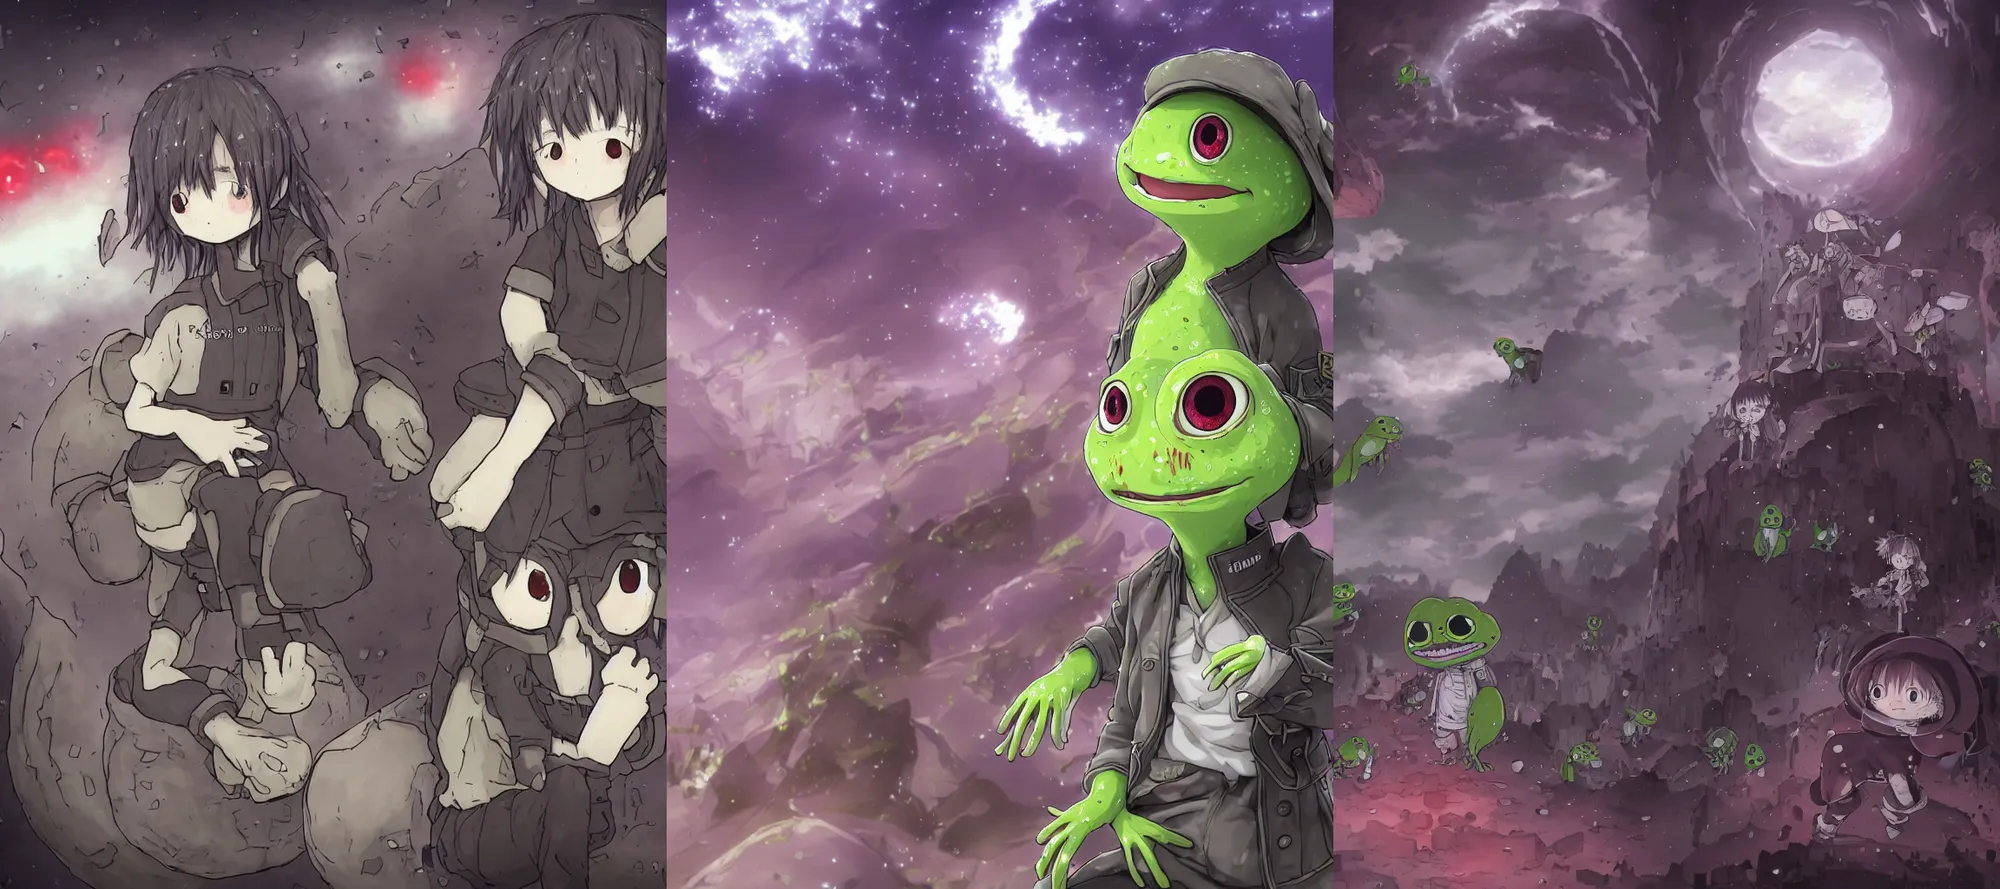 Prompt: resolution 4k worlds of loss and depression made in abyss design Akihito Tsukushi design body pepe the frogs group of them a bloody conflict body horror curse of the abyss war , battlefield darkness military drummer boy pepe , desolated city the sky is filled with red halos over each of their heads dragon, pepe ivory dream like storybooks, fractals , pepe the frogs at war, art in the style of and Oleg Vdovenko and Akihito Tsukushi